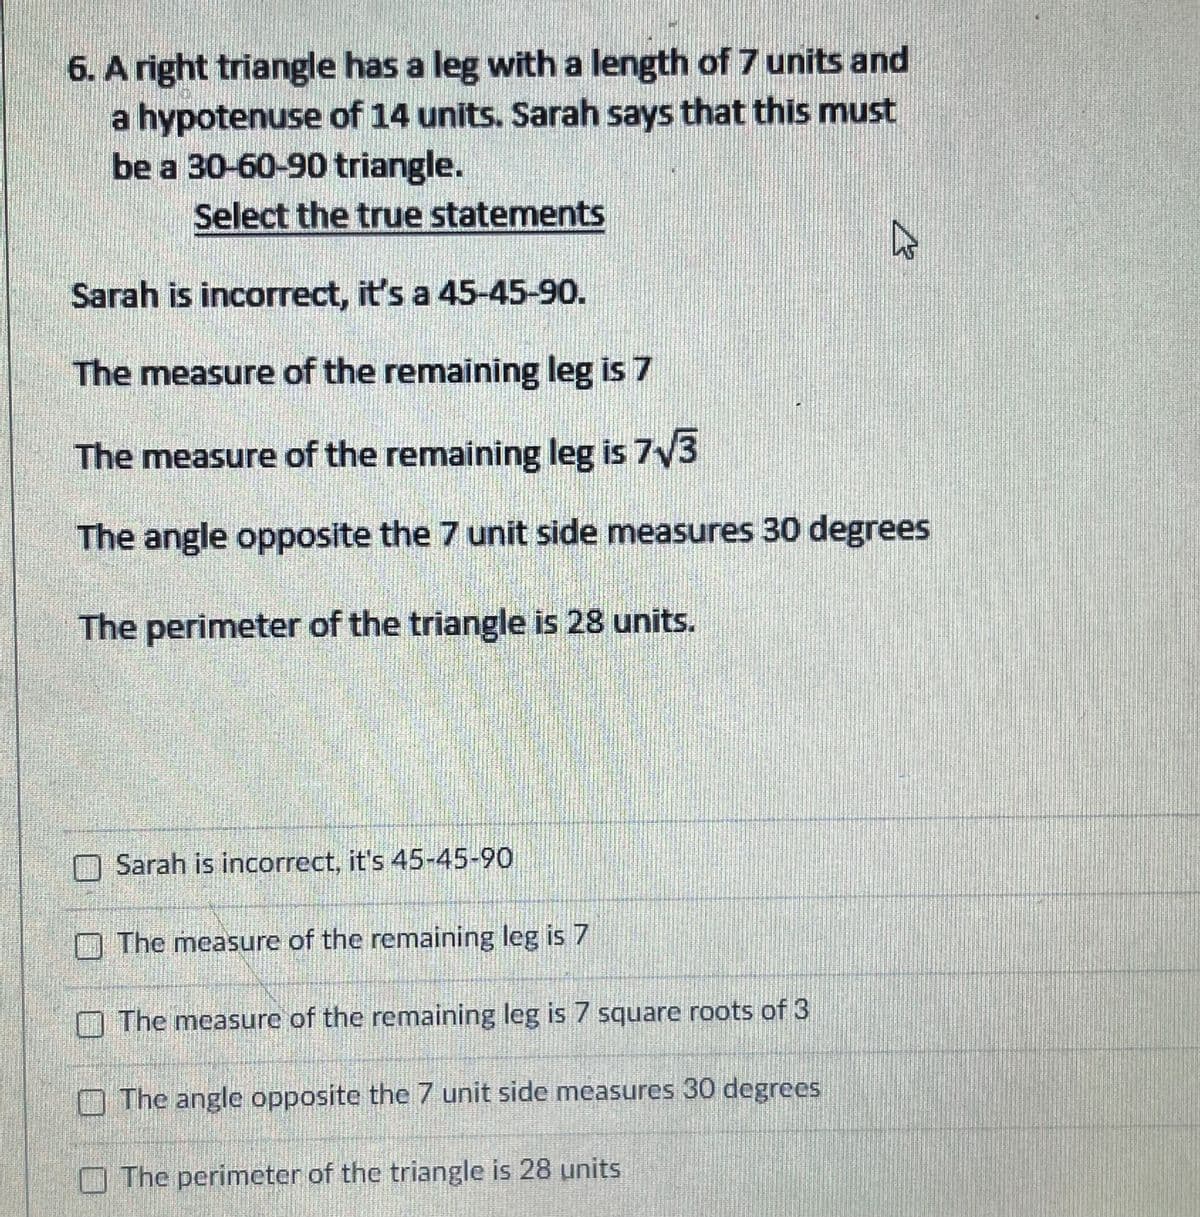 6. A right triangle has a leg with a length of7 units and
a hypotenuse of 14 units. Sarah says that this must
be a 30-60-90 triangle.
Select the true statements
Sarah is incorrect, it's a 45-45-90.
The measure of the remaining leg is 7
The measure of the remaining leg is 7V3
The angle opposite the 7 unit side measures 30 degrees
The perimeter of the triangle is 28 units.
Sarah is incorrect, it's 45-45-90
O The measure of the remaining leg is 7
O The measure of the remaining leg is 7 square roots of 3
O The angle opposite the 7 unit side measures 30 degrees
O The perimeter of the triangle is 28 units
